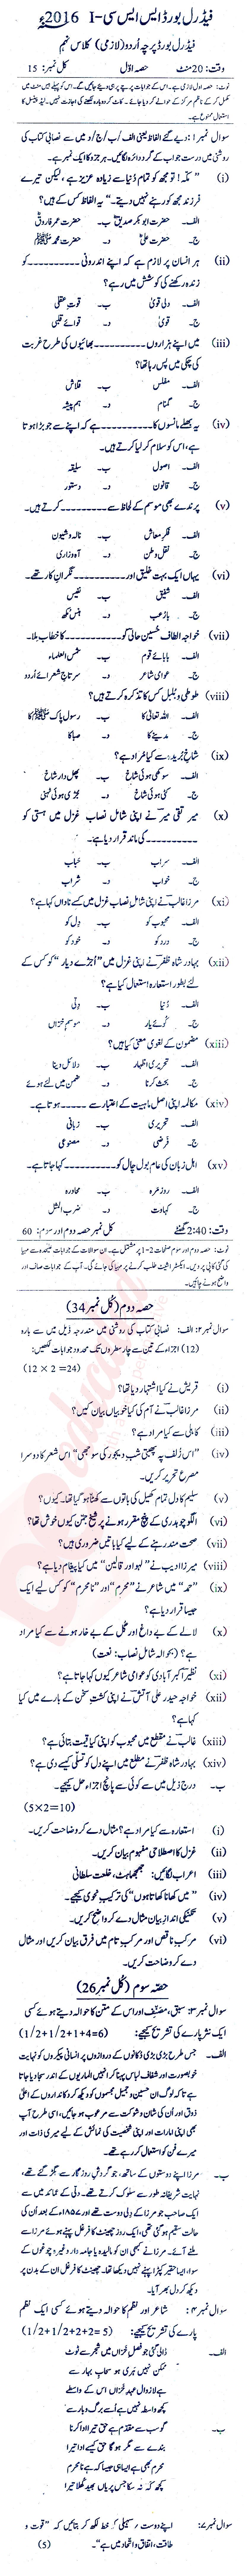 Urdu 9th class Past Paper Group 1 Federal BISE  2016